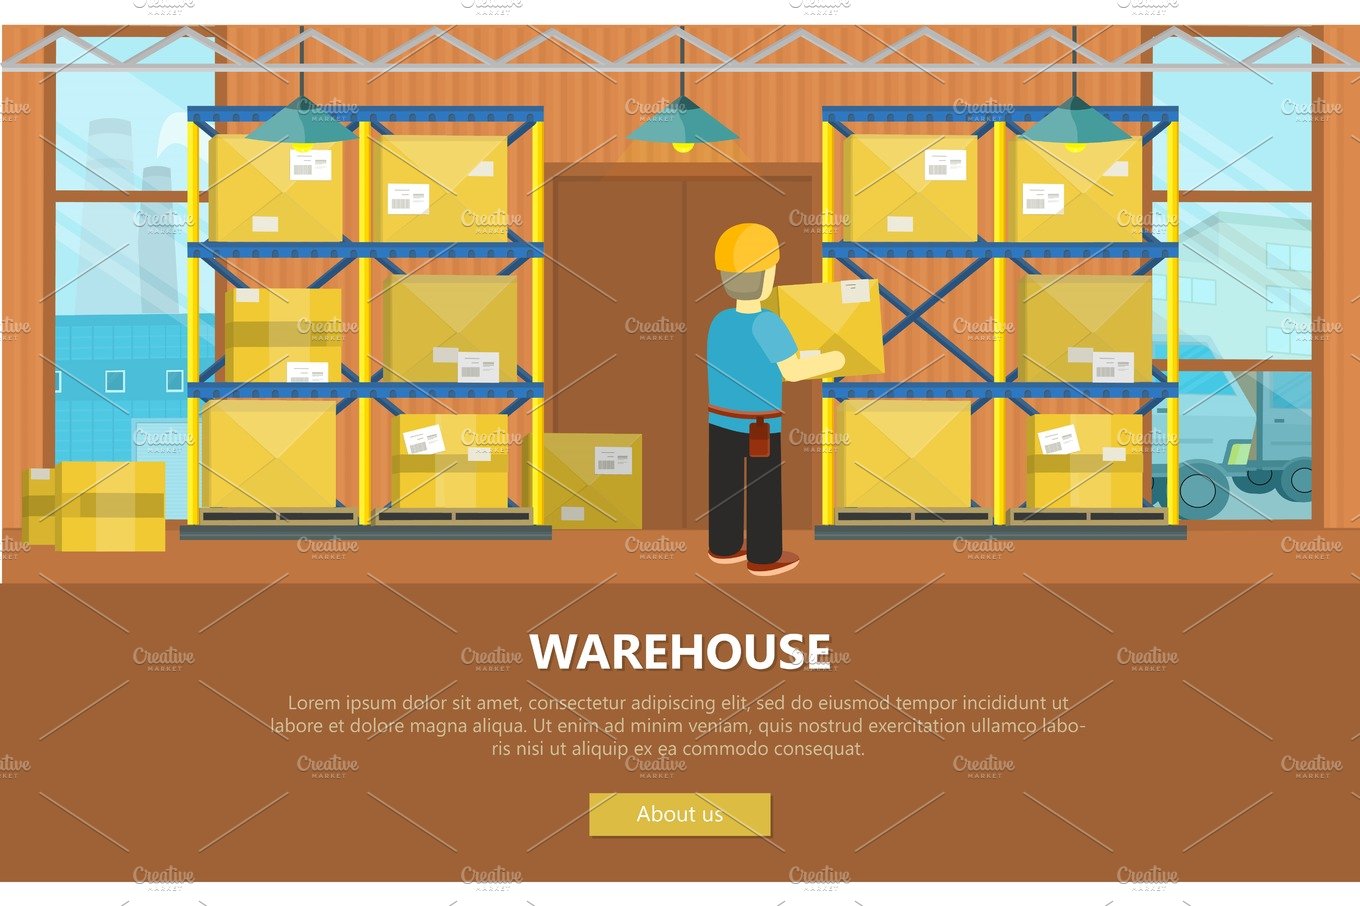 Warehouse Interior Banner cover image.